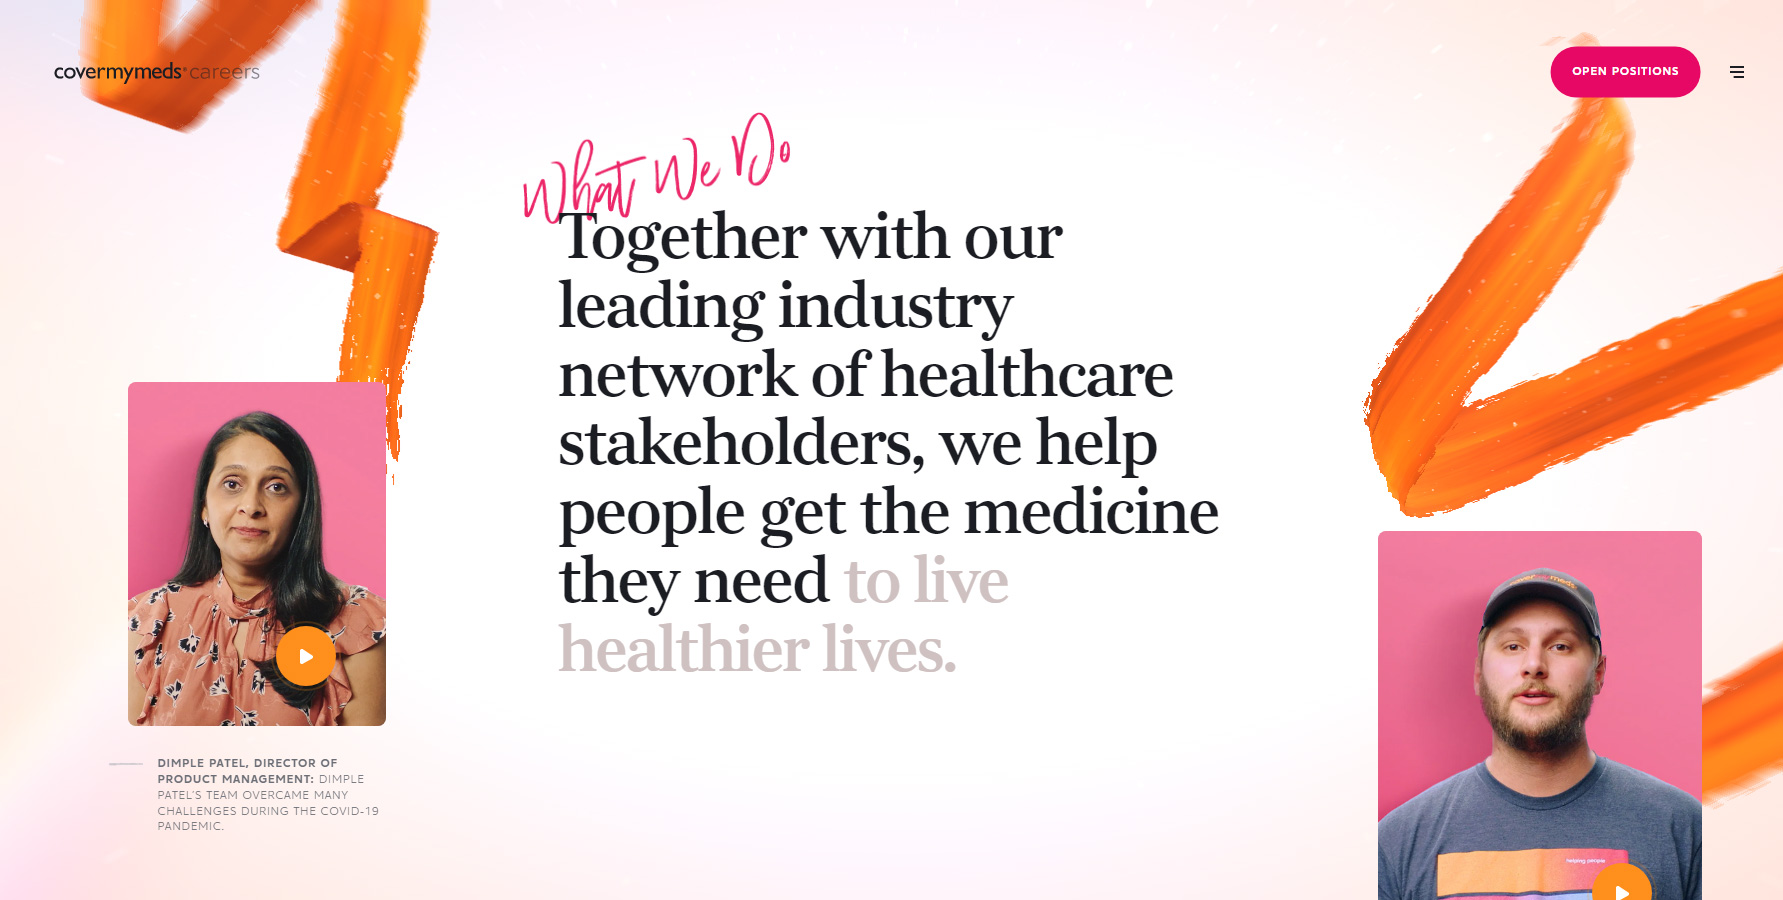 CoverMyMeds Careers - Website of the Day